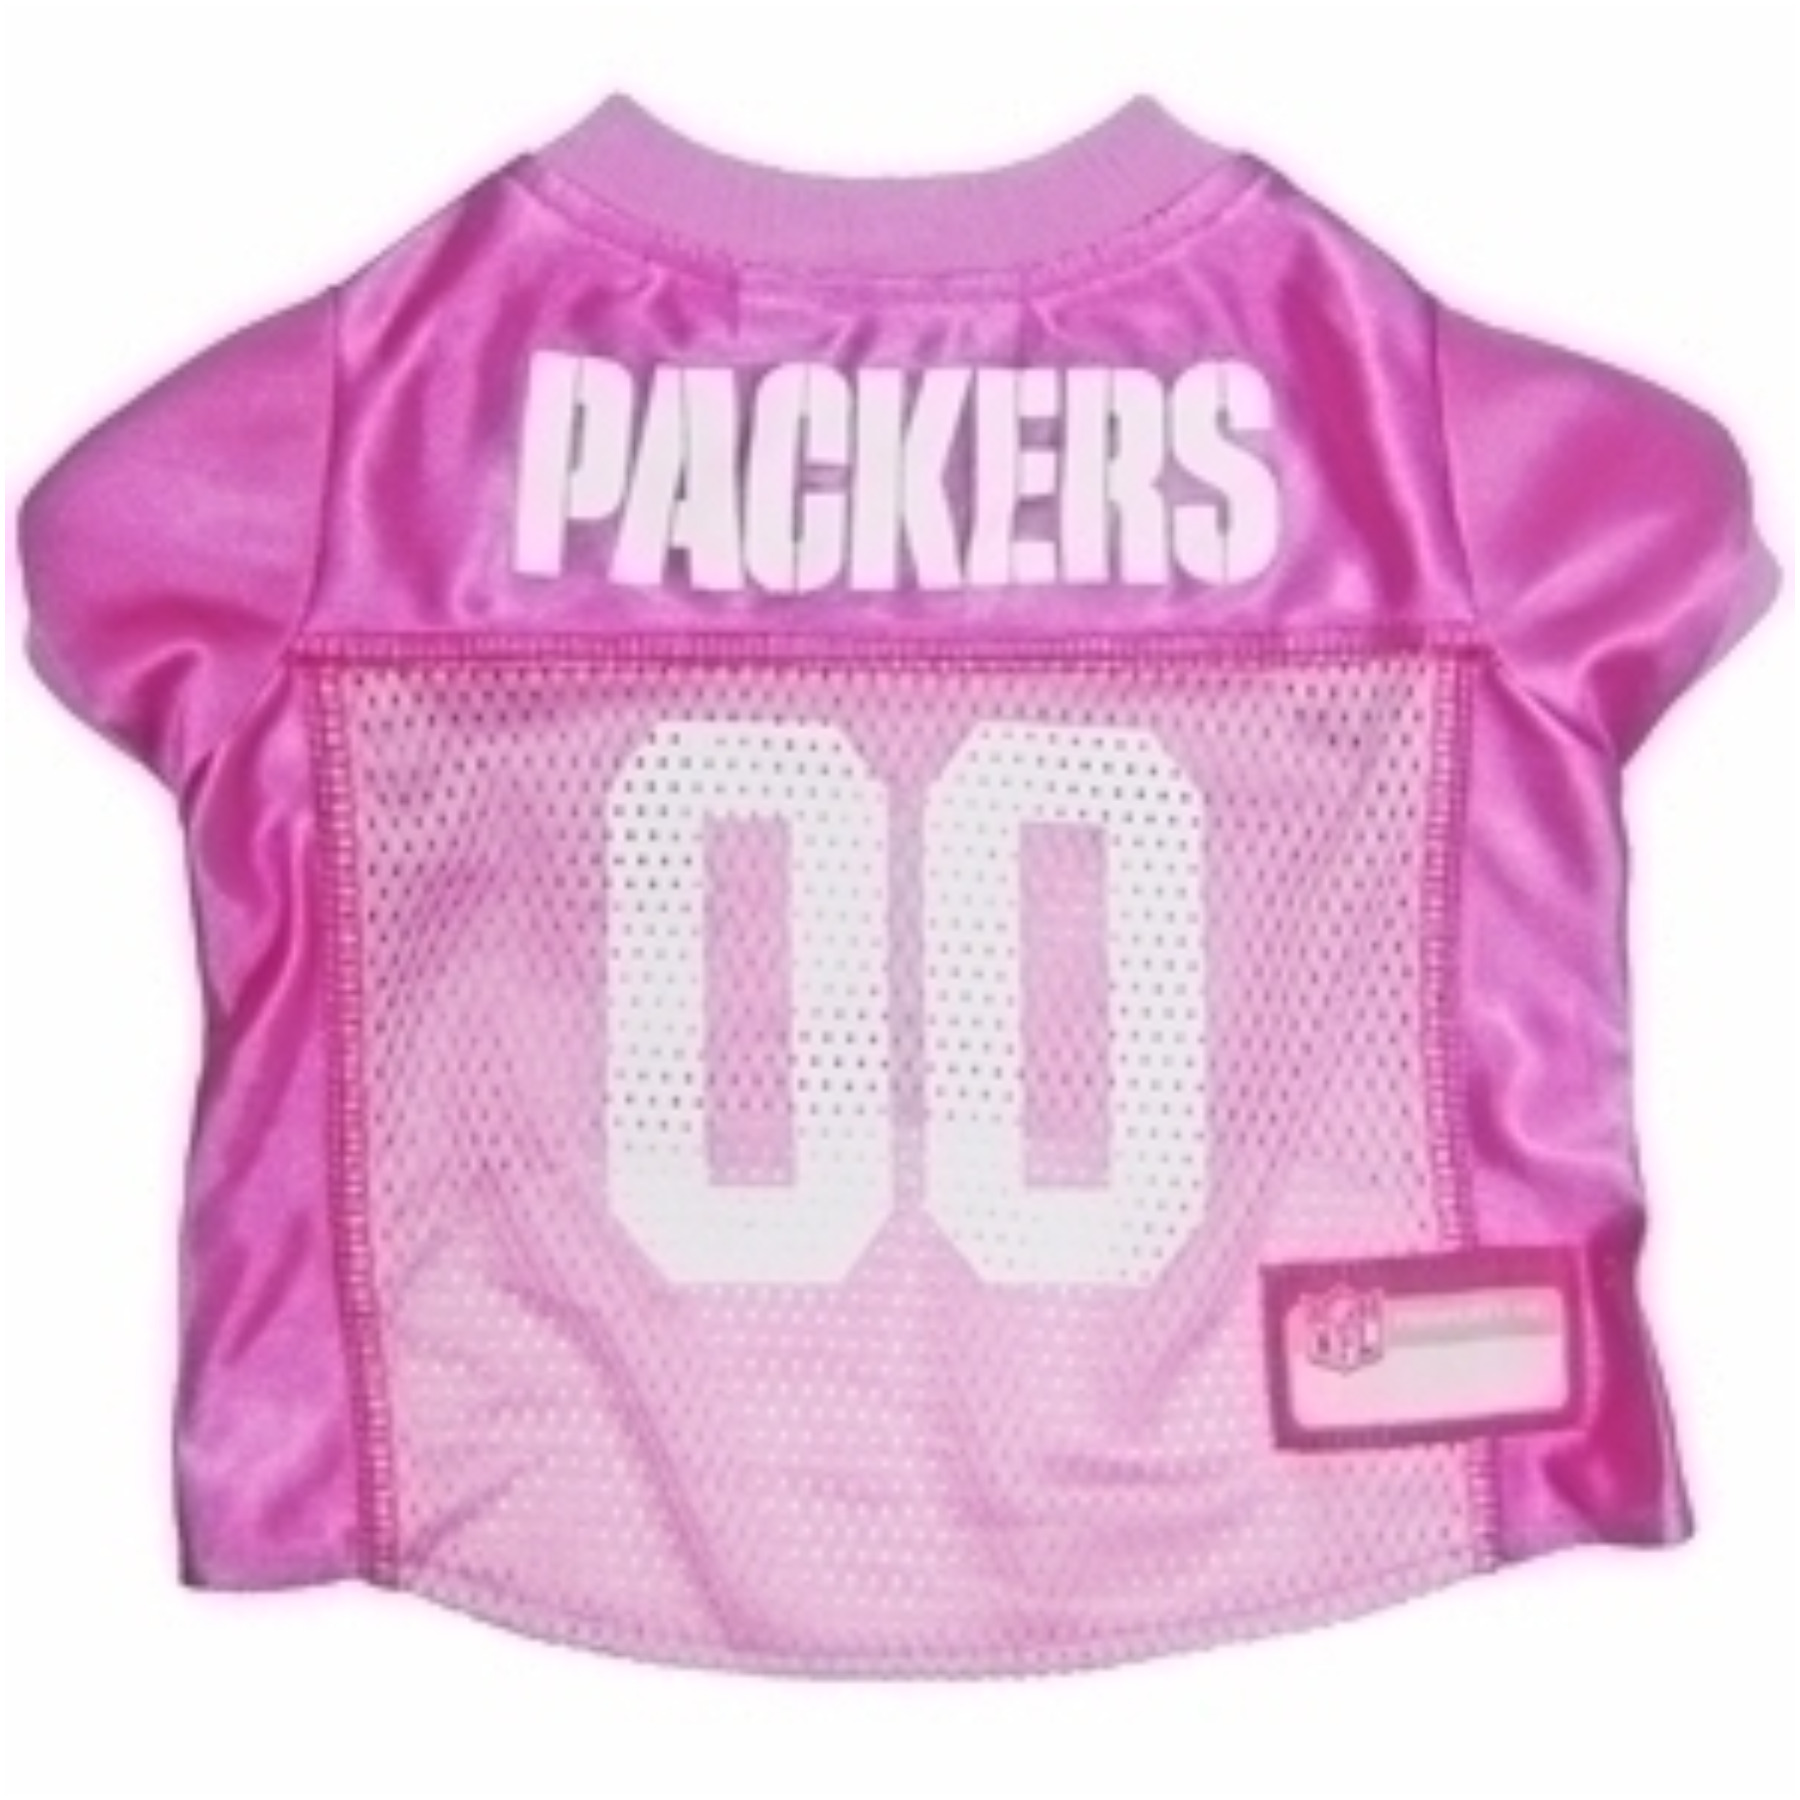 Green Bay Packers Dog Jersey - Pink